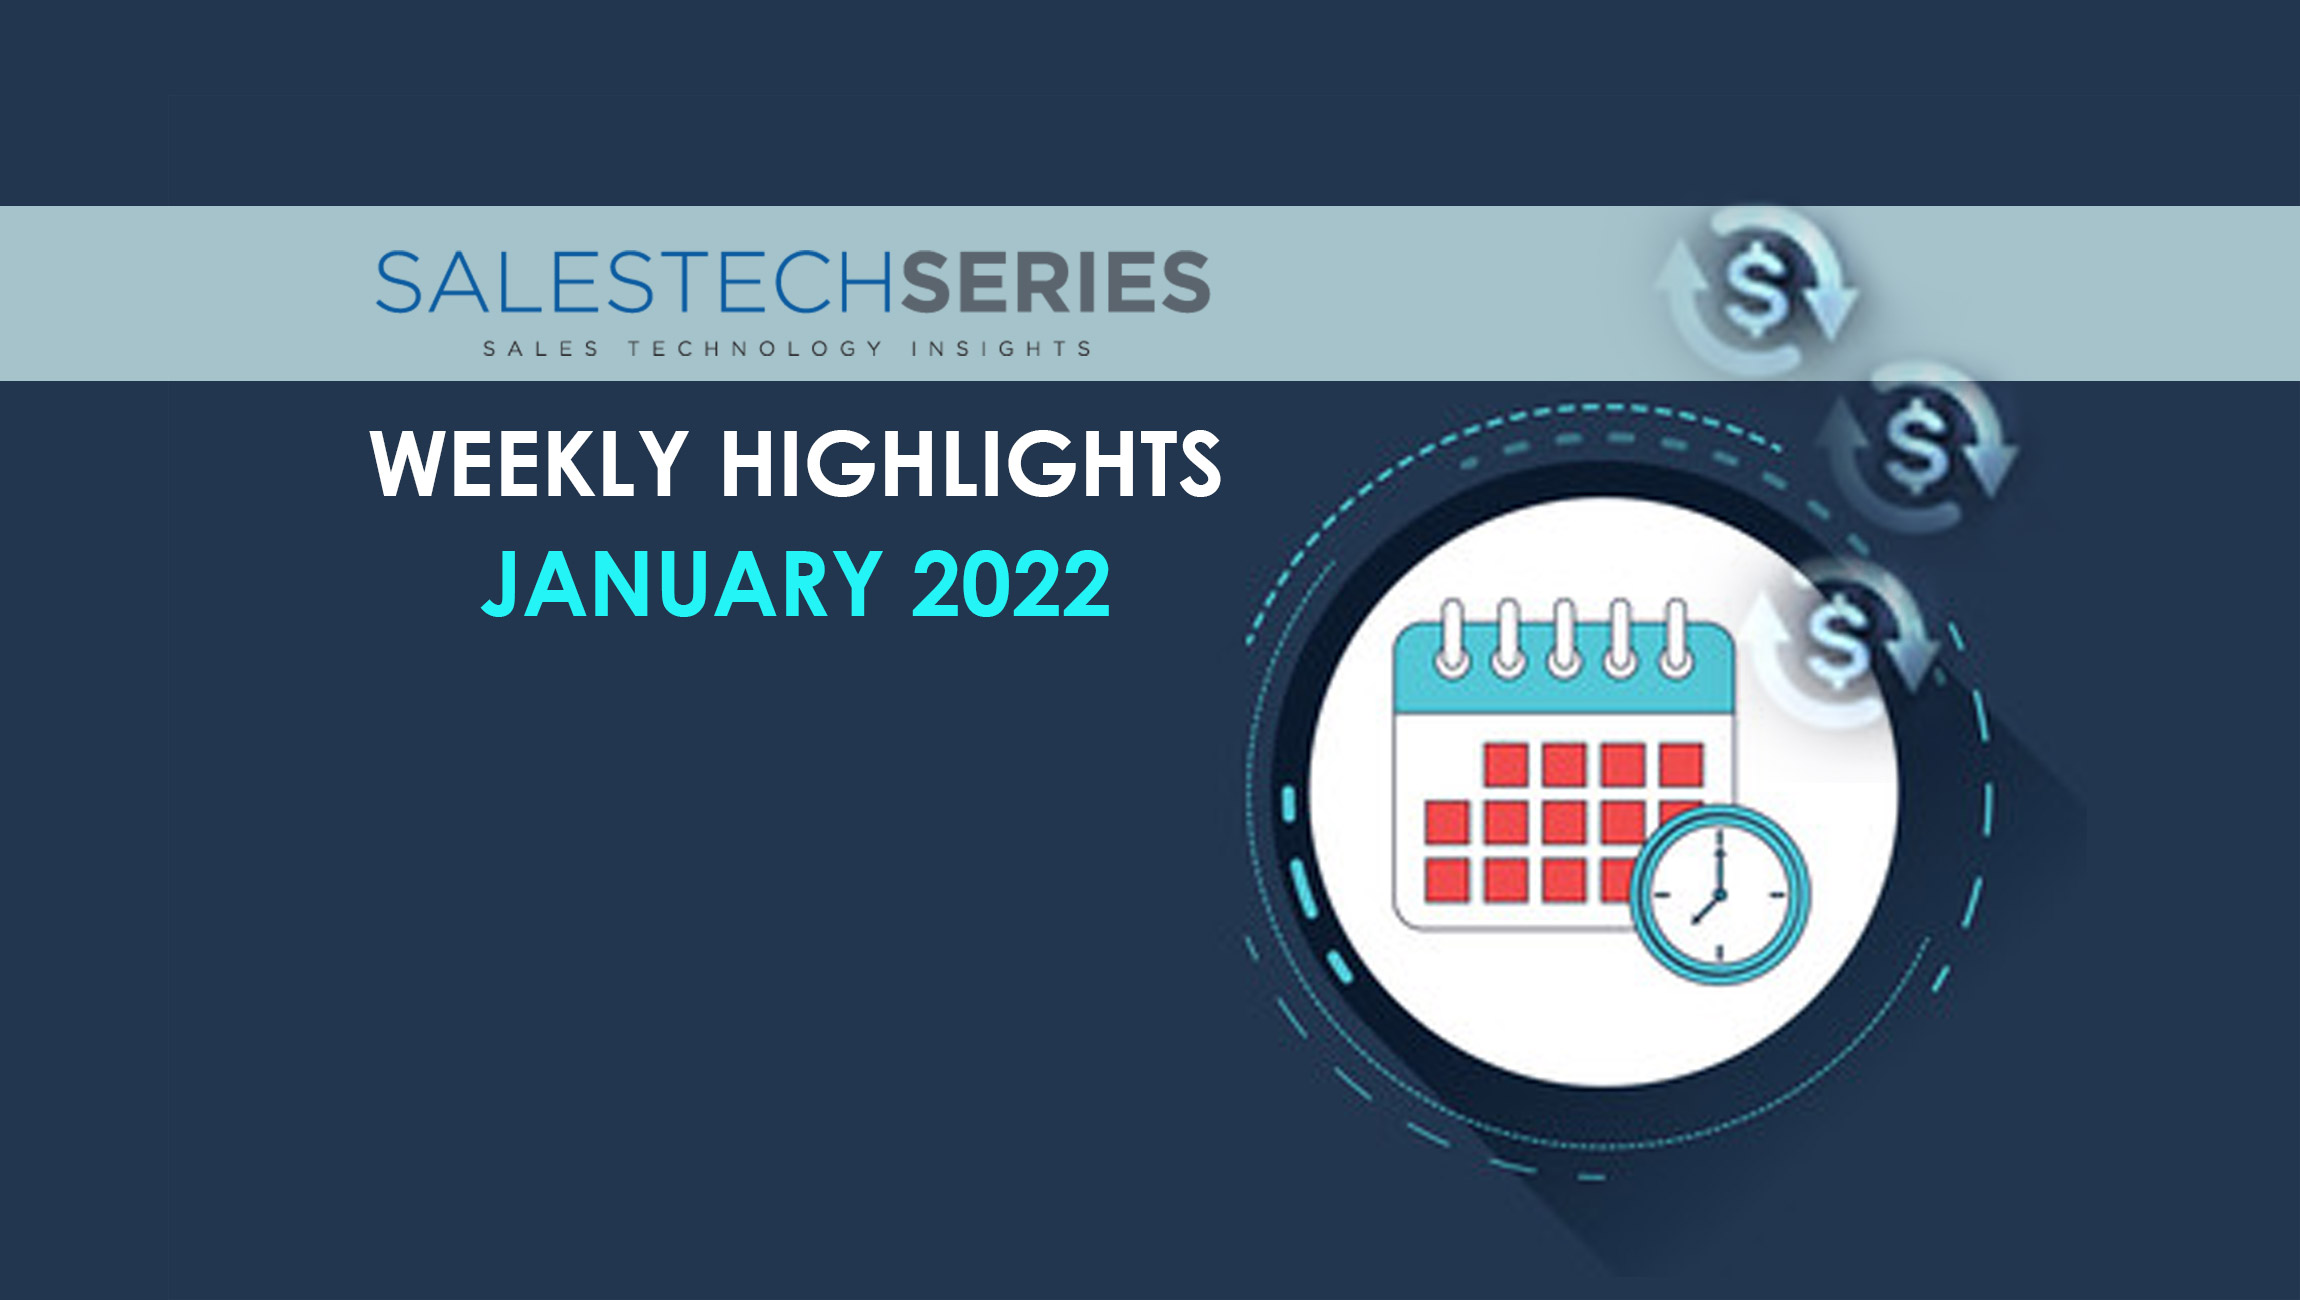 SalesTechStar’s Sales Technology Highlights of The Week: Featuring Uber, Bigtincan, Playvox, Cognism and More !